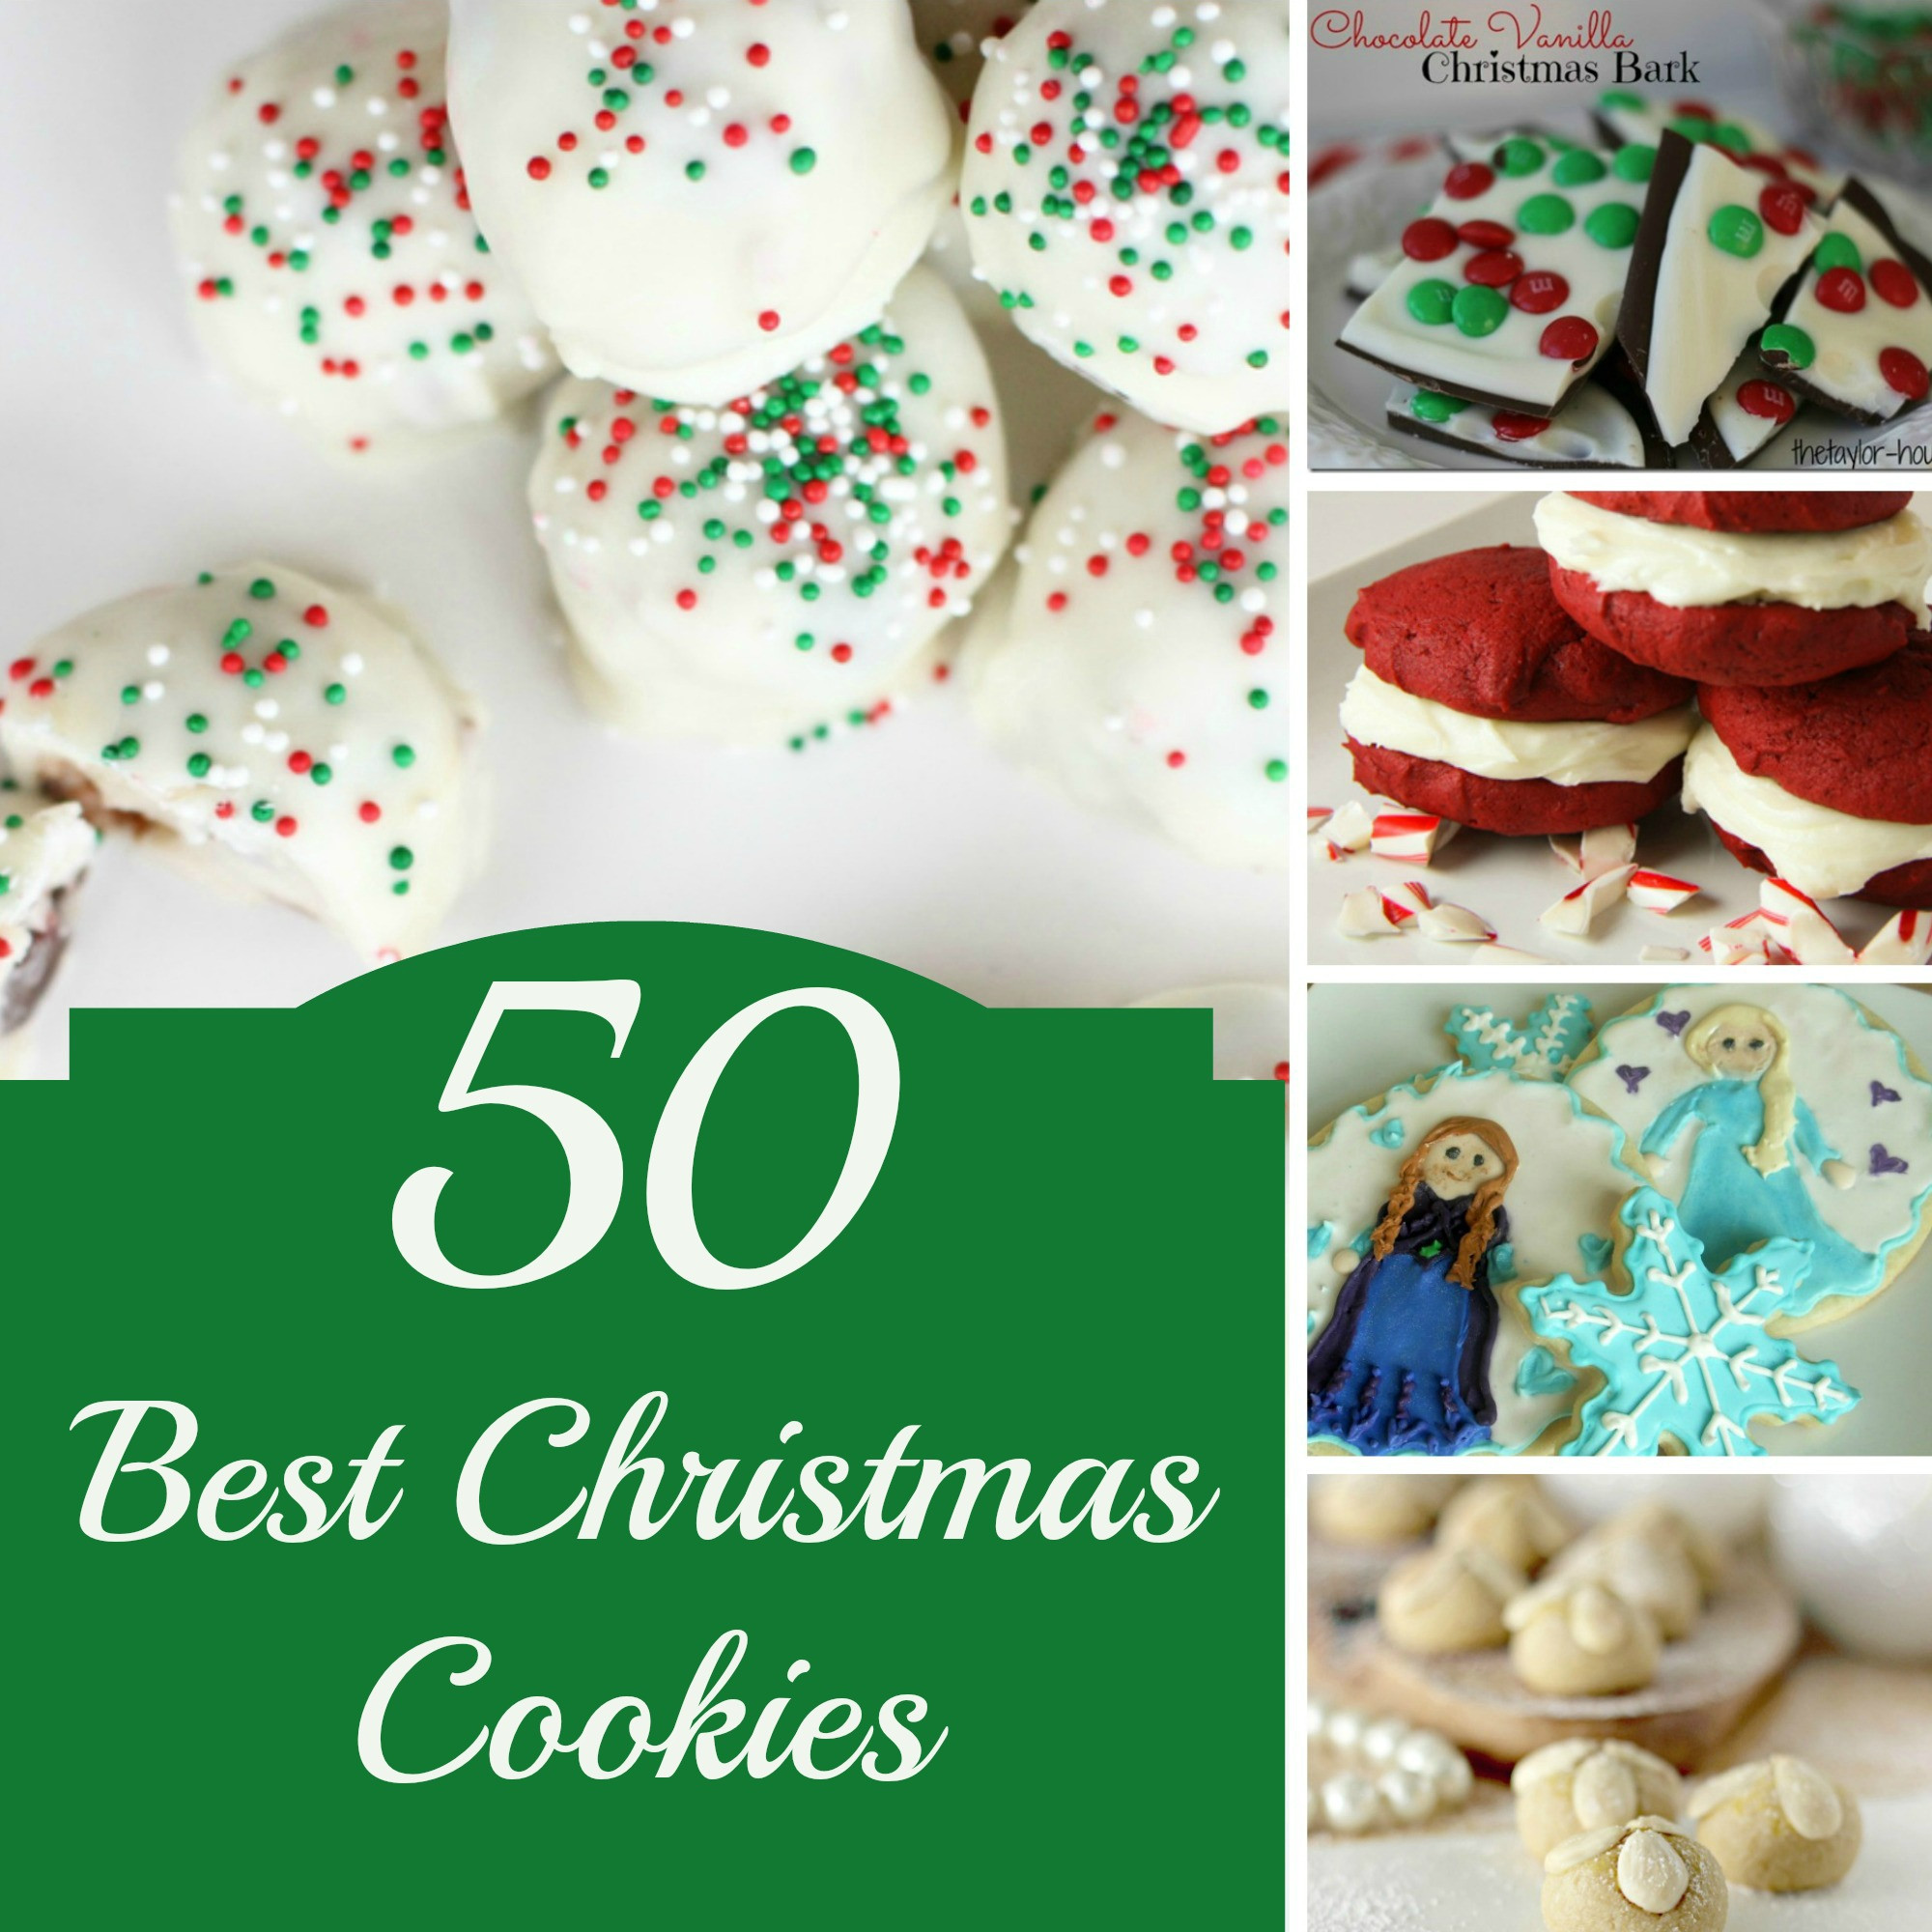 Pinterest Christmas Cookies
 50 BEST Christmas Cookies to Make this Year